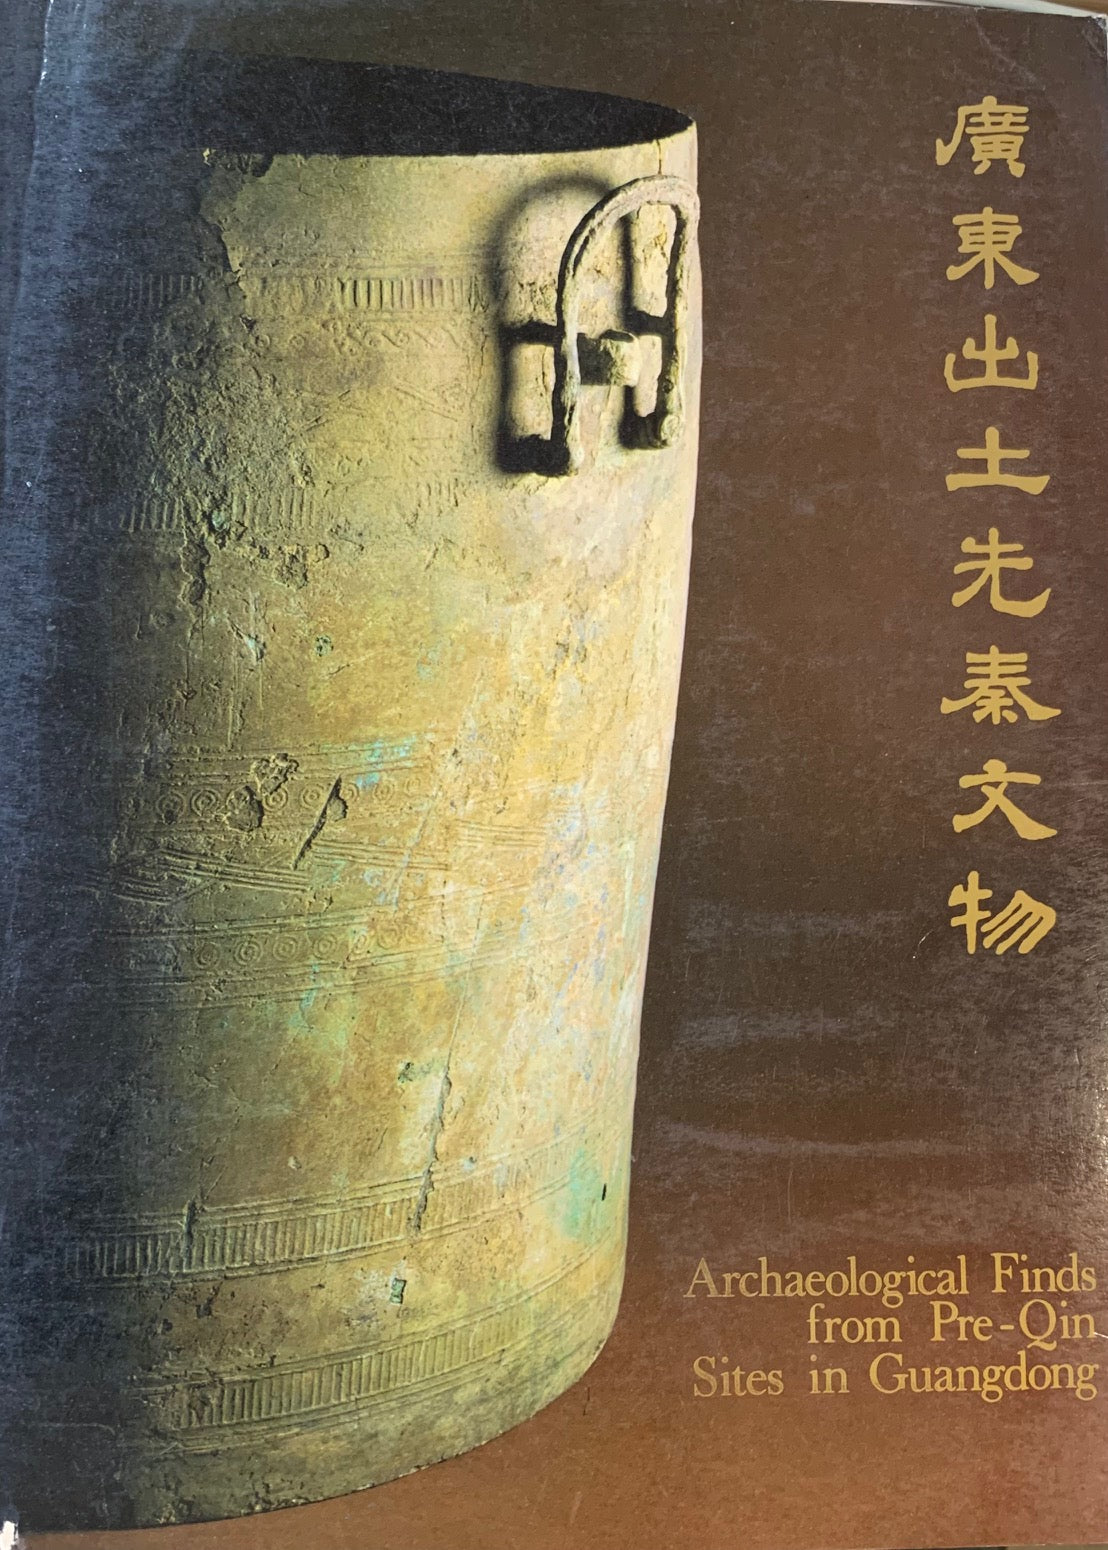 Archaeological Finds from Pre-Qin Sites in Guangdong.